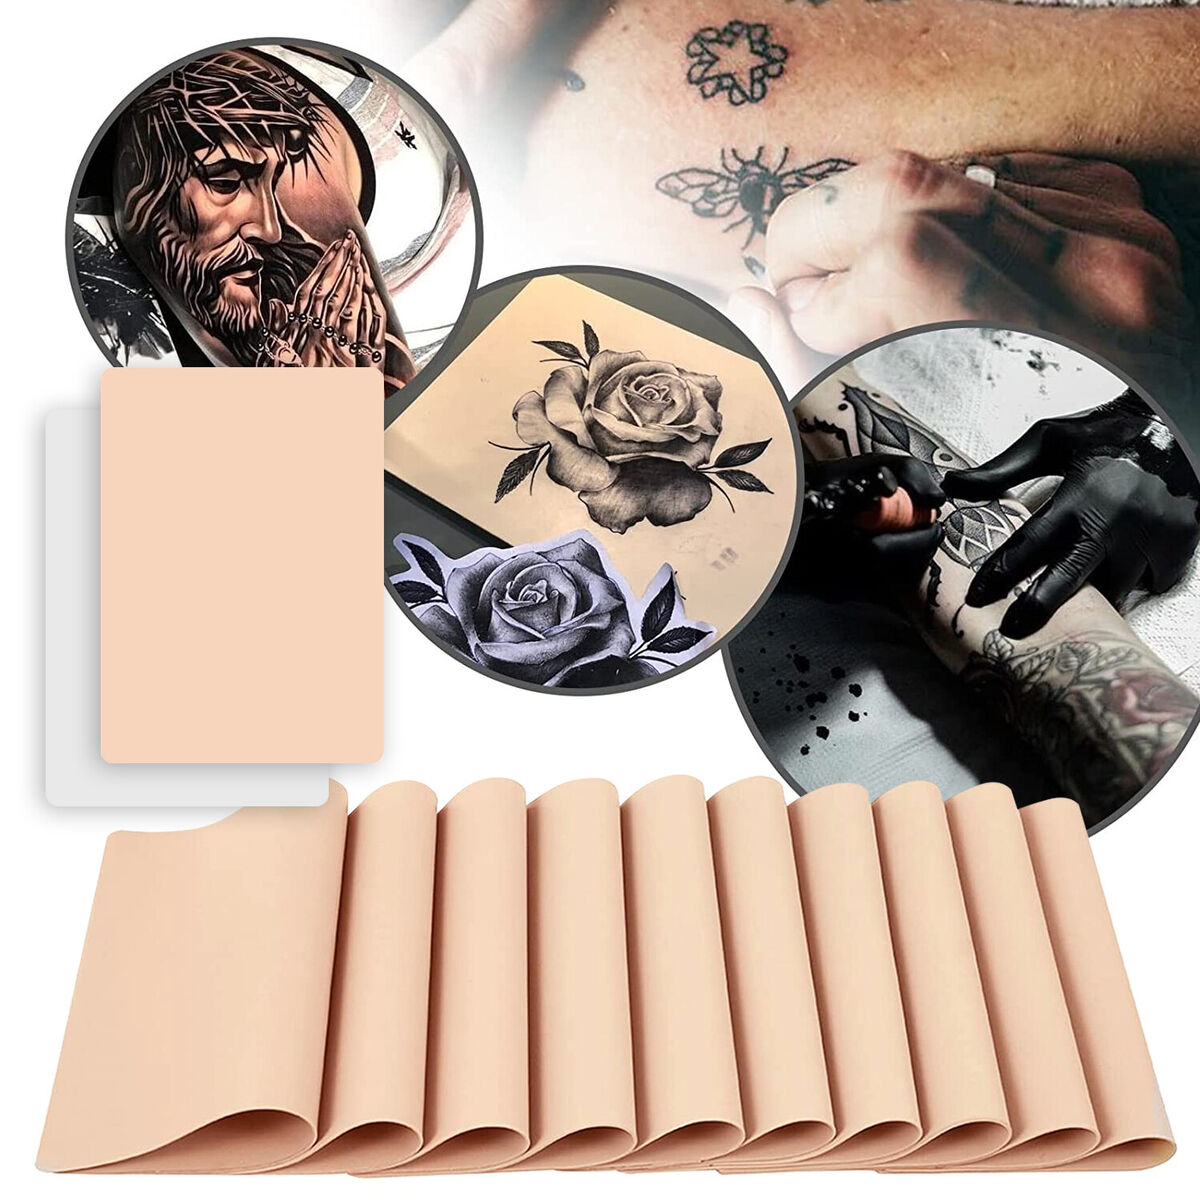 5-100PCS 6"x8" Tattoo Skin Practice Double Sides Fake Skin for Tattoo Supplies